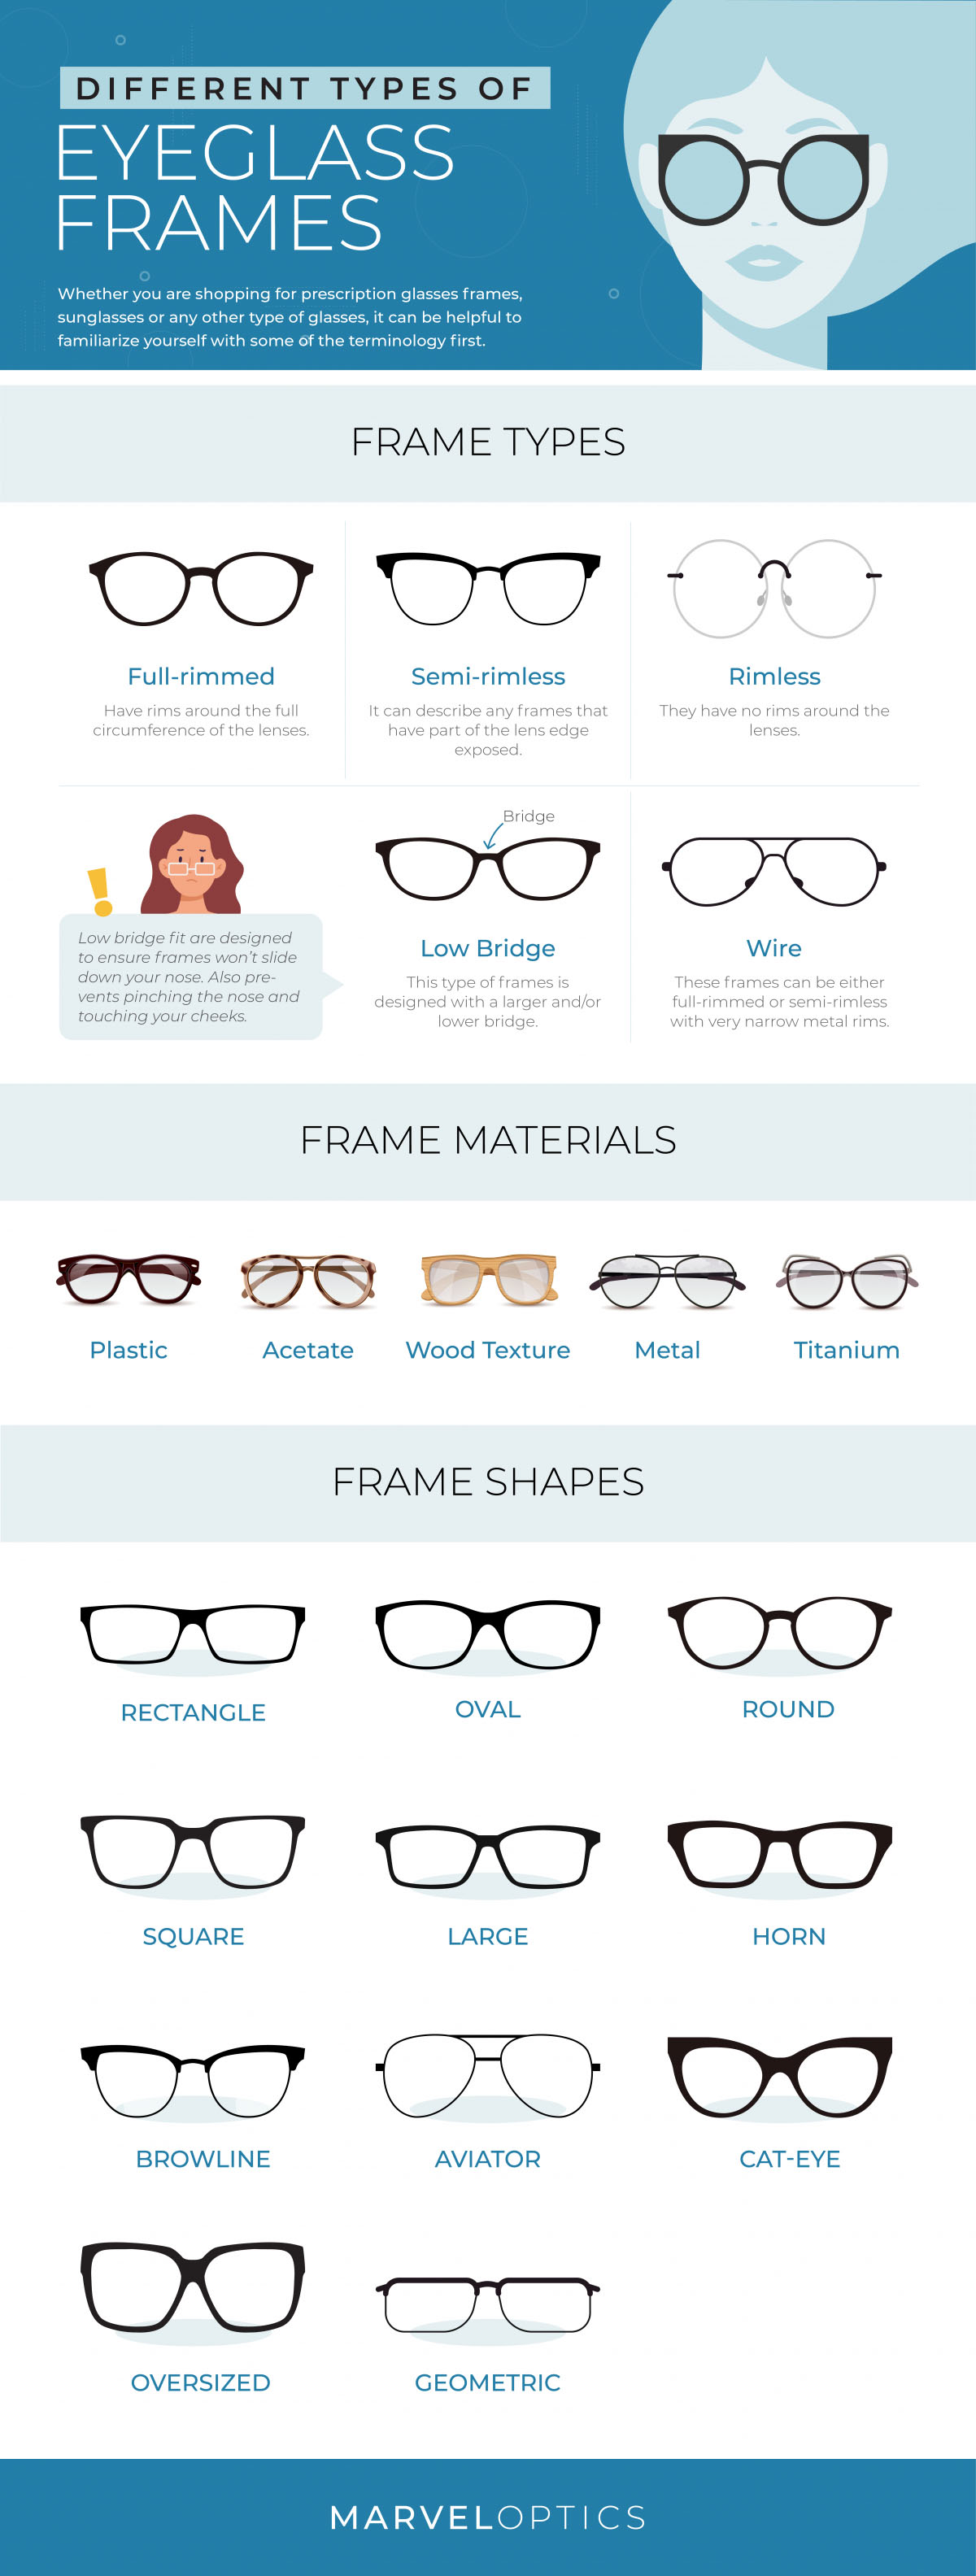 The Different Types of Eyeglass Frames